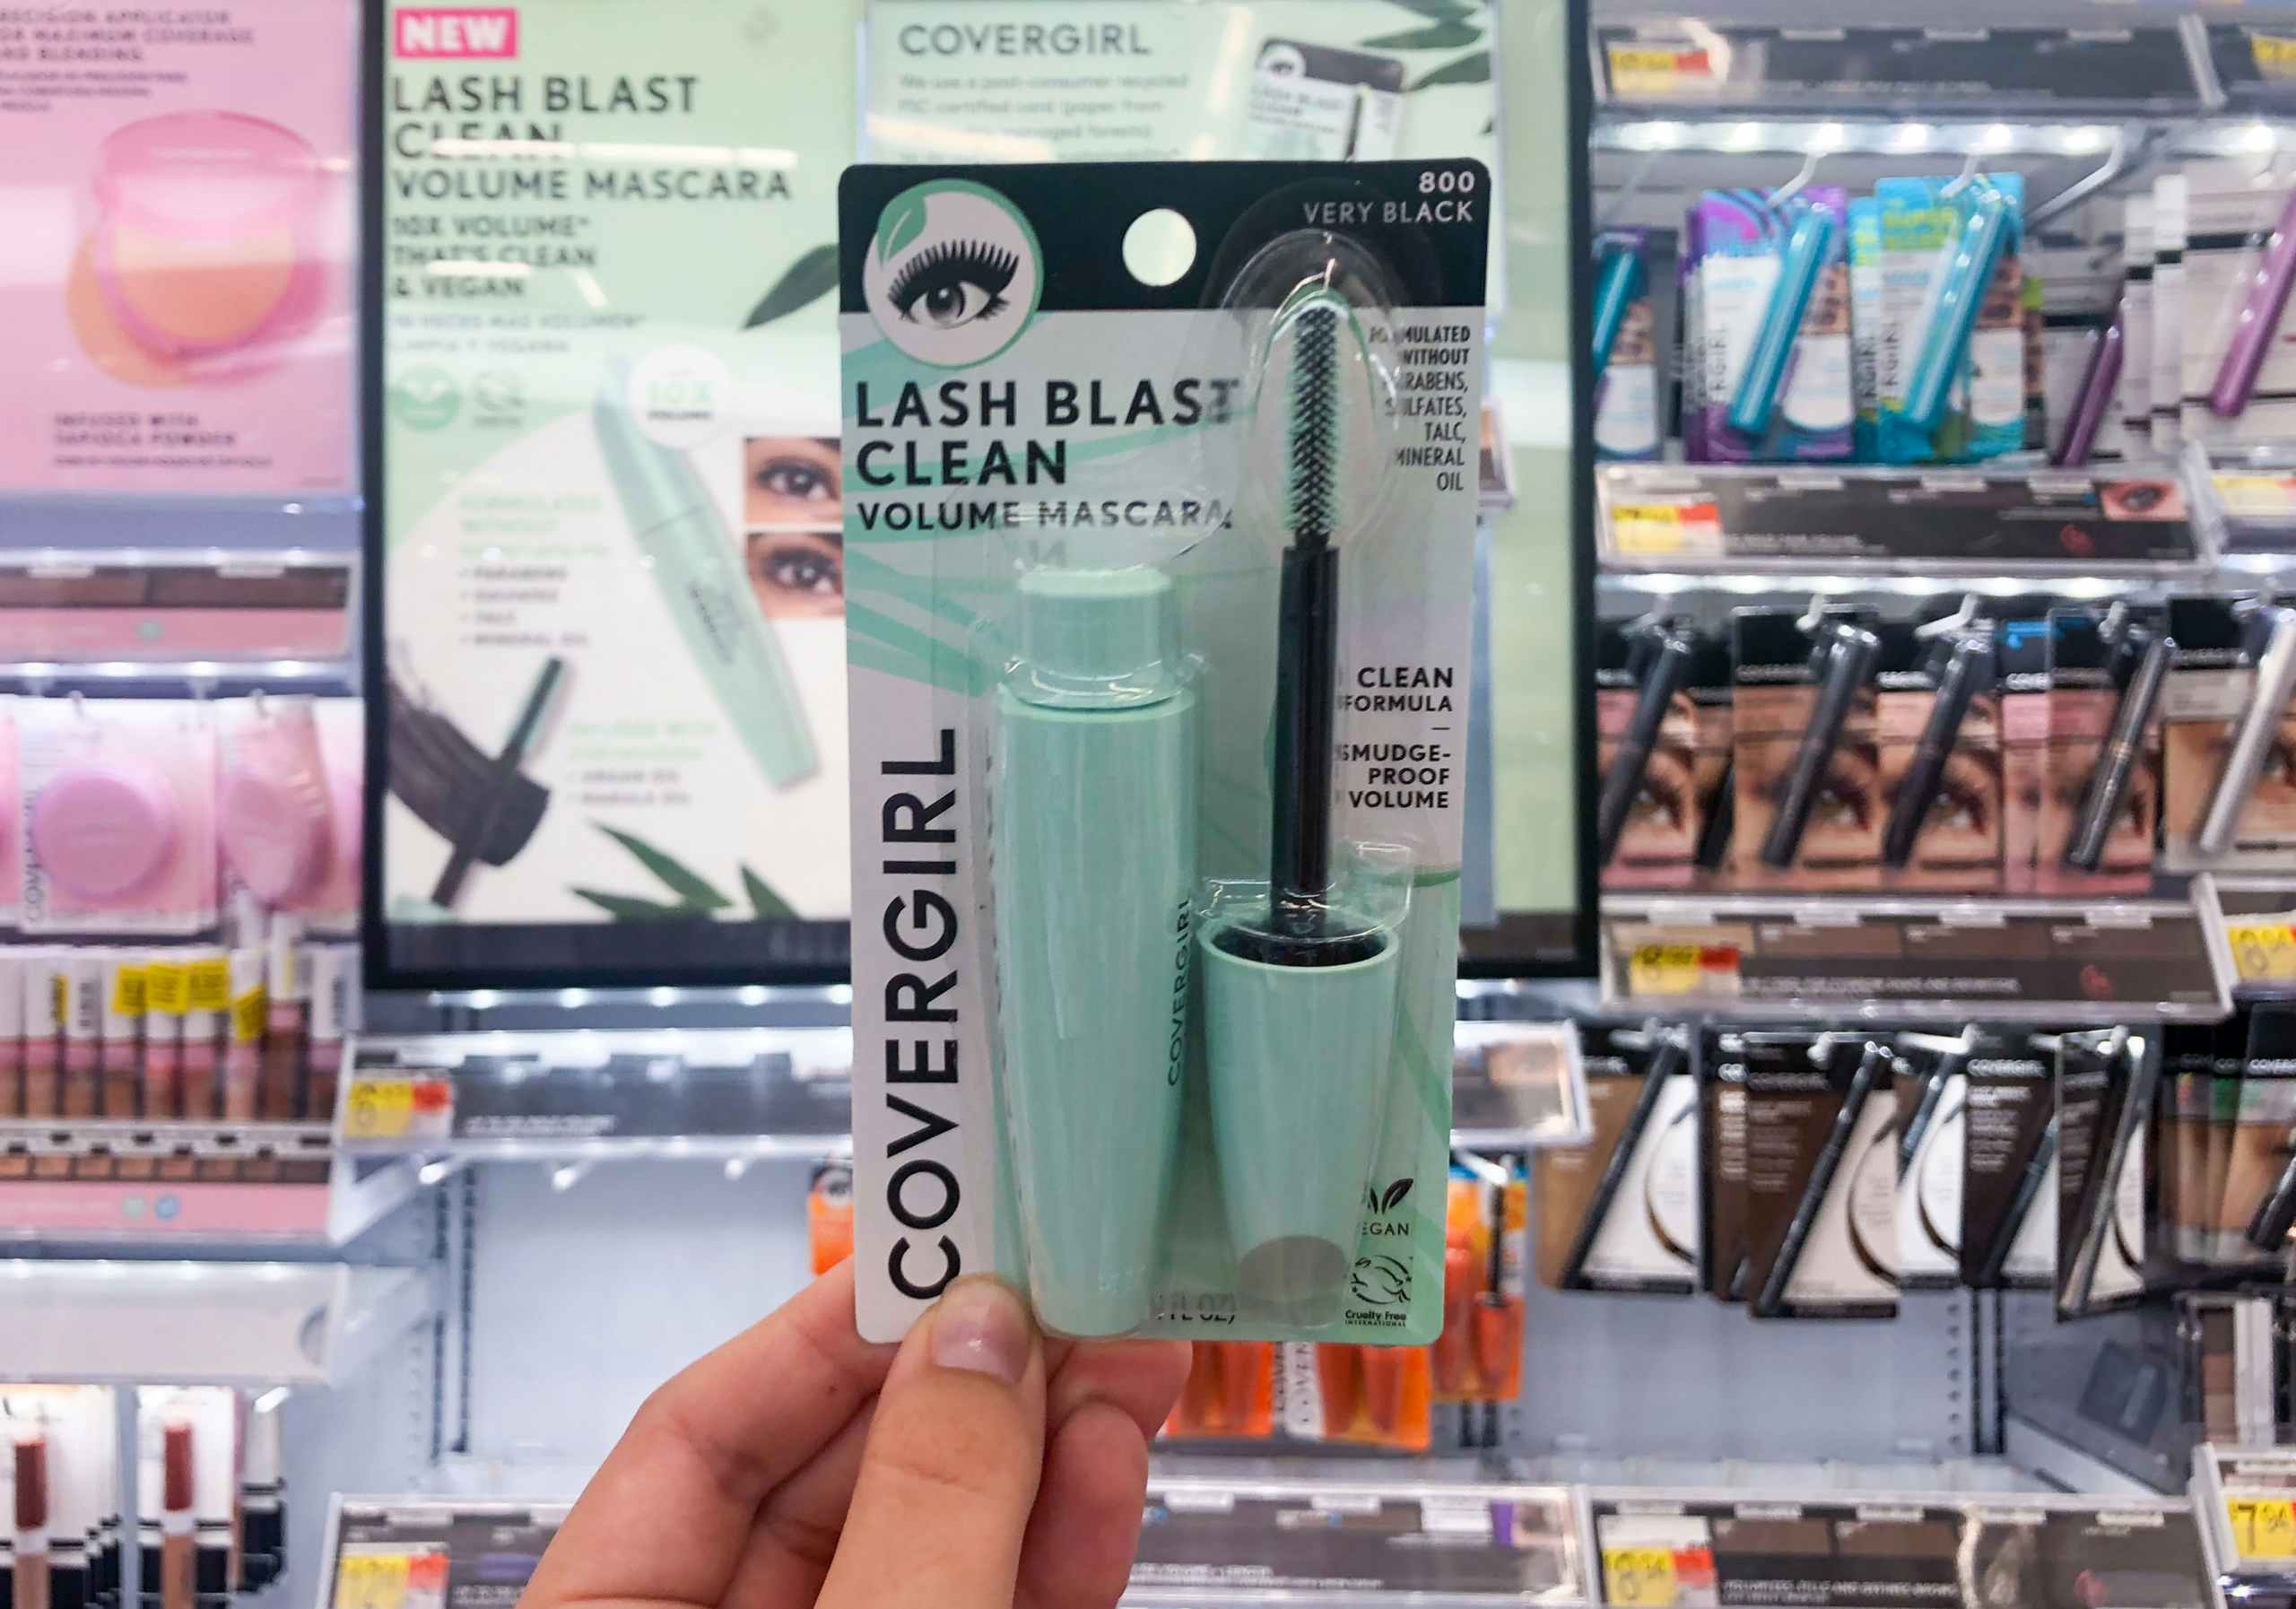 hand holding mascara in front of store Covergirl display